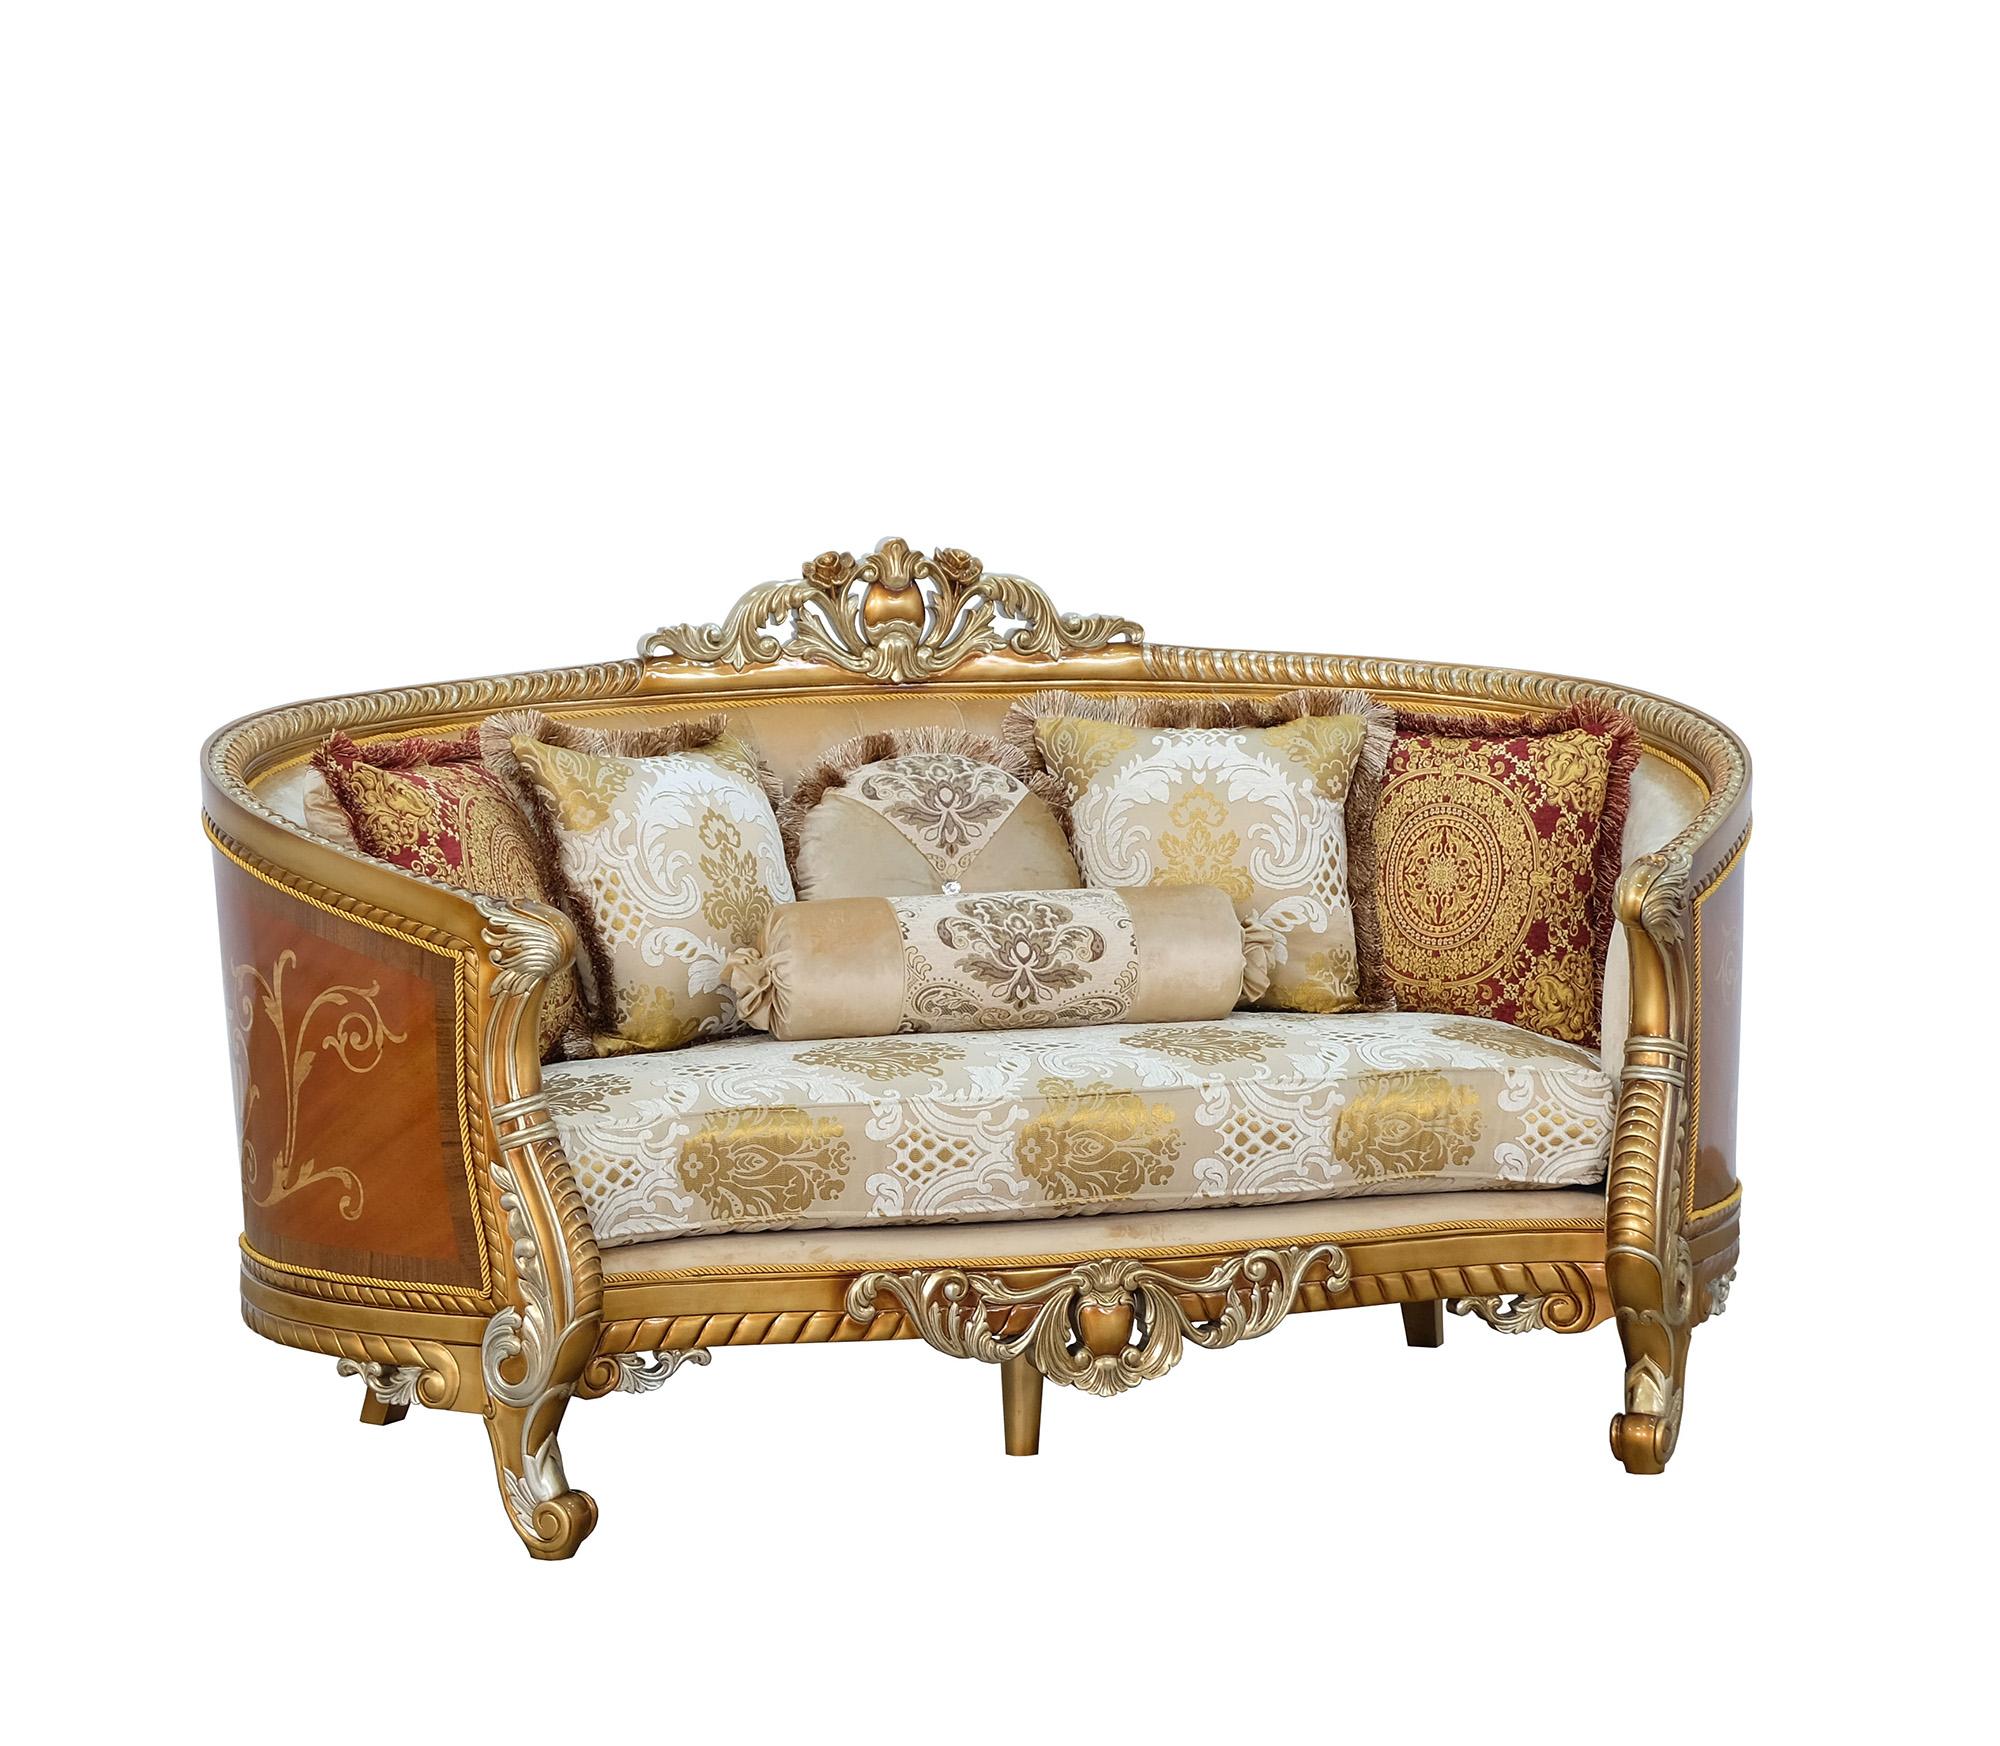 Classic, Traditional Loveseat LUXOR II 68587-L in Antique, Gold, Brown Fabric